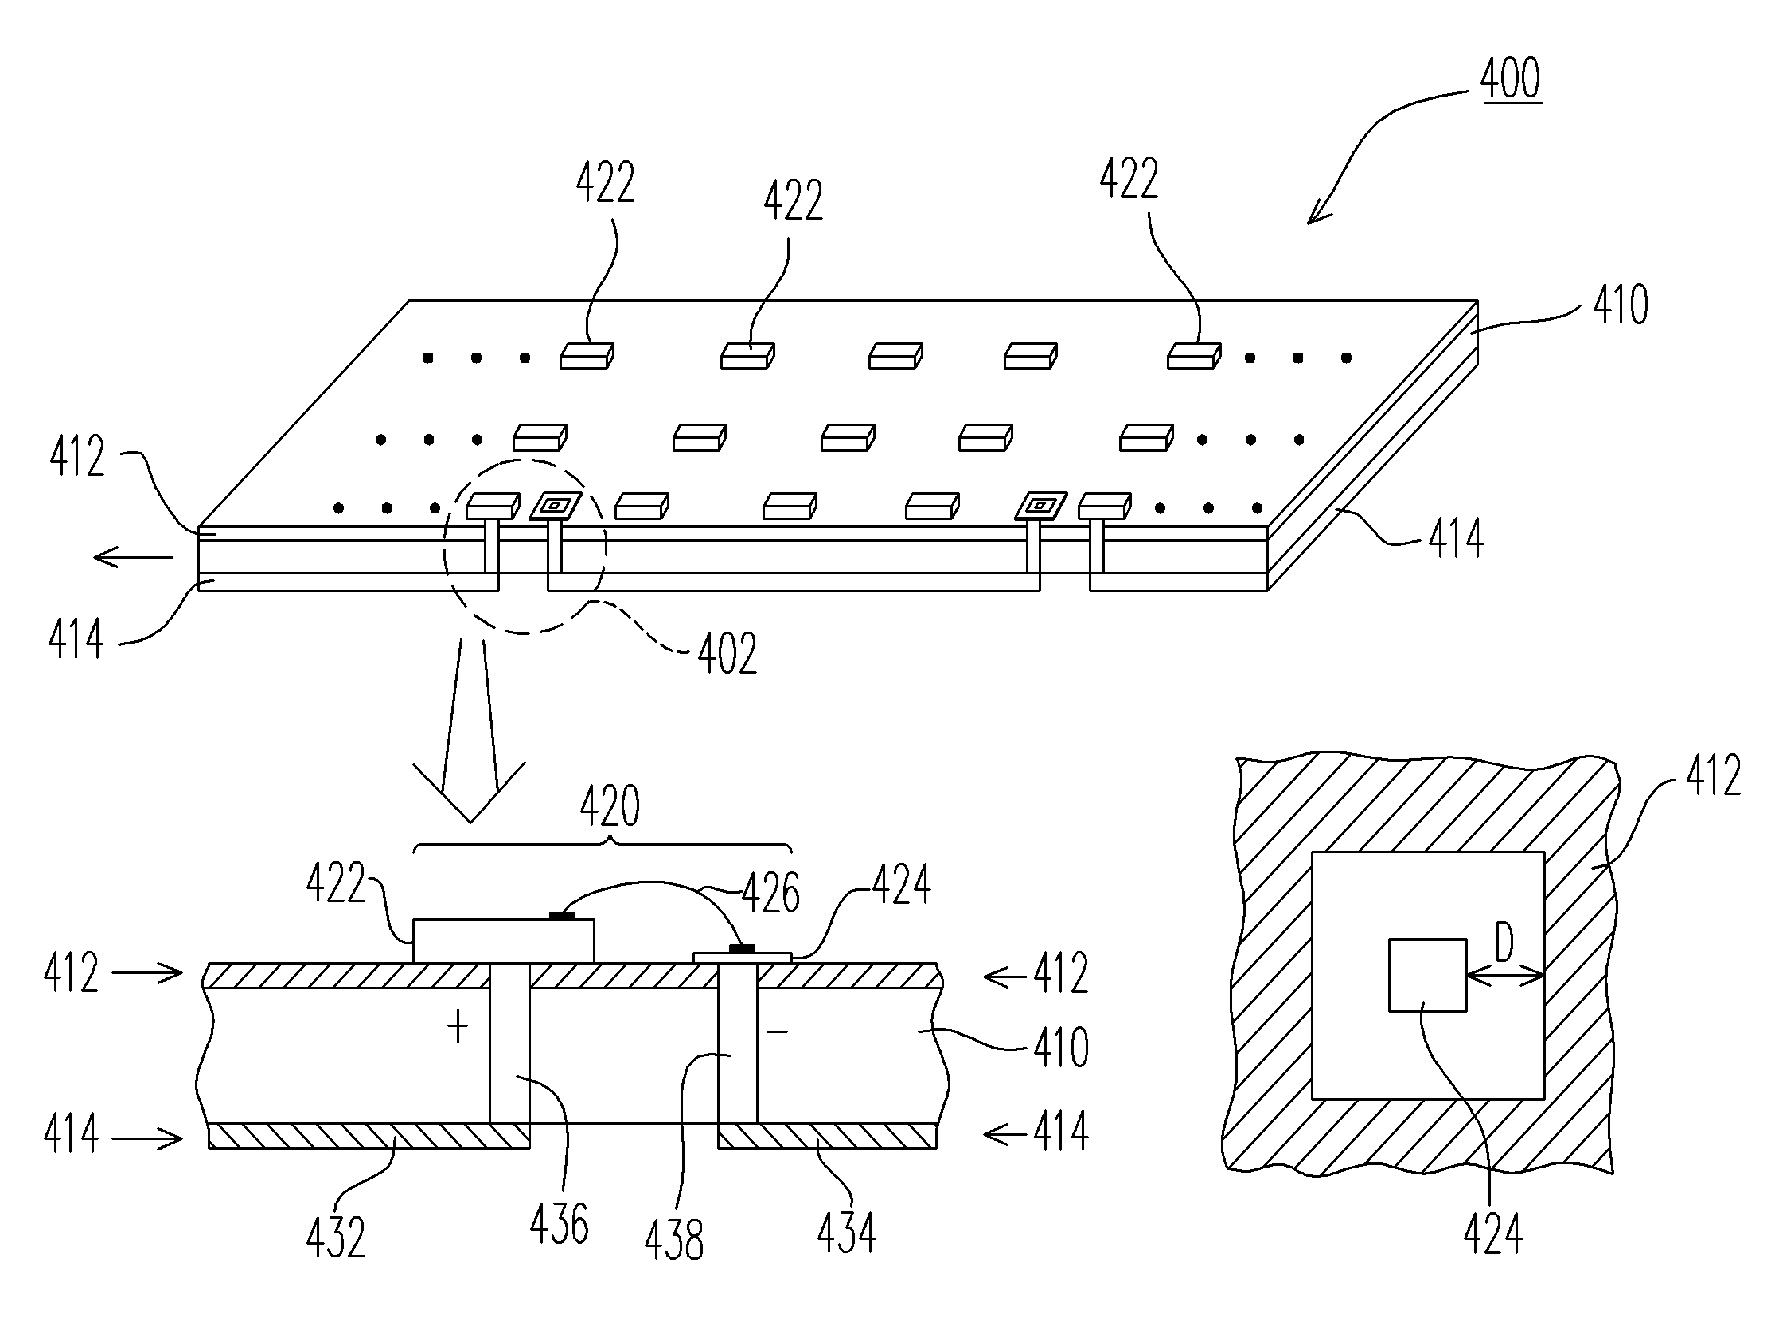 Bendable solid state planar light source structure